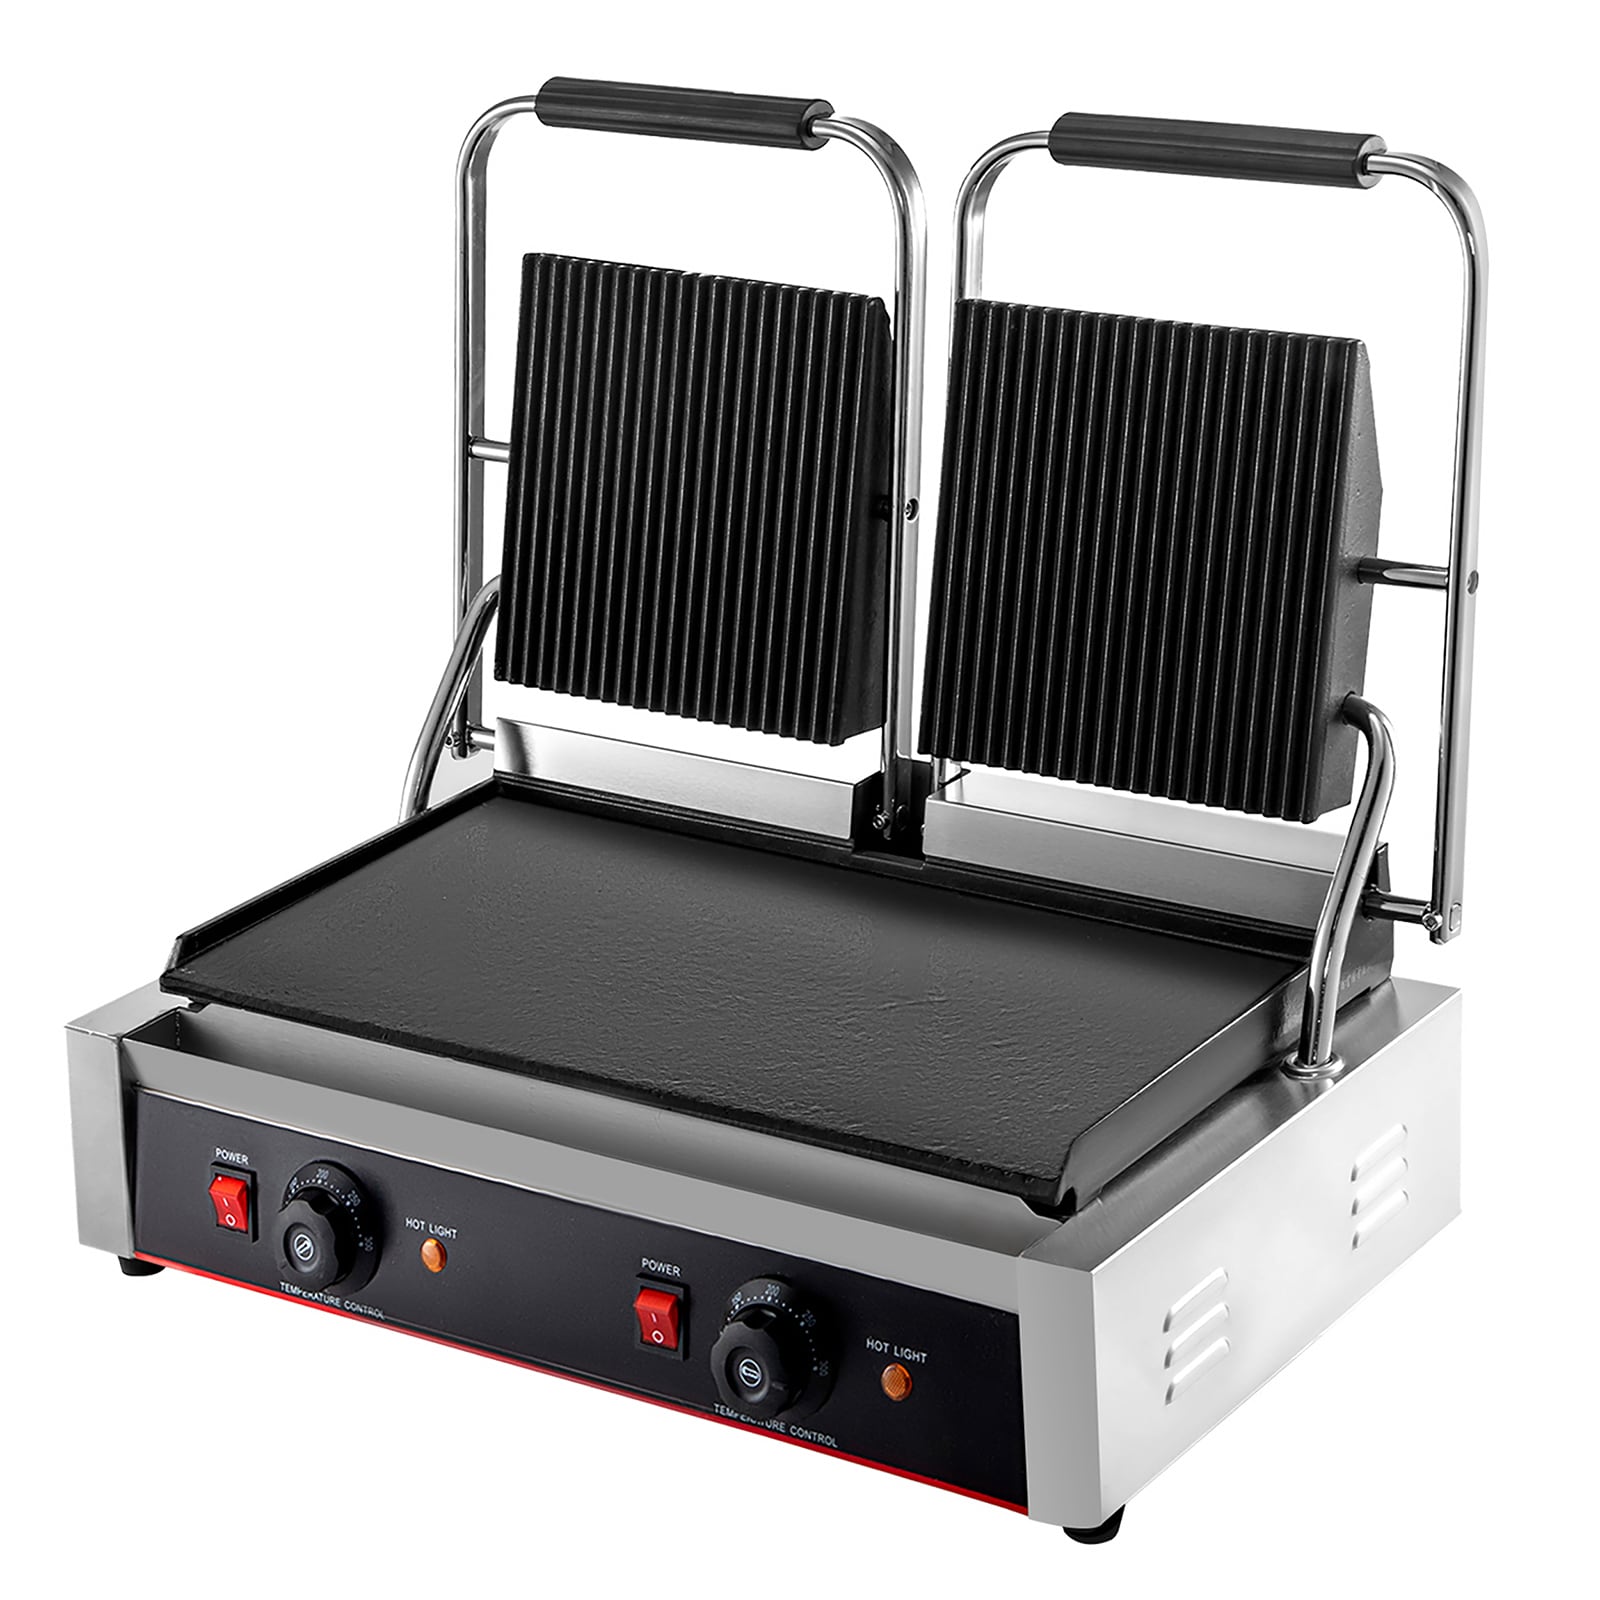 VEVOR 28.7-in L x 15.7-in W 3000-Watt Silver Electric Griddle in the  Electric Griddles department at